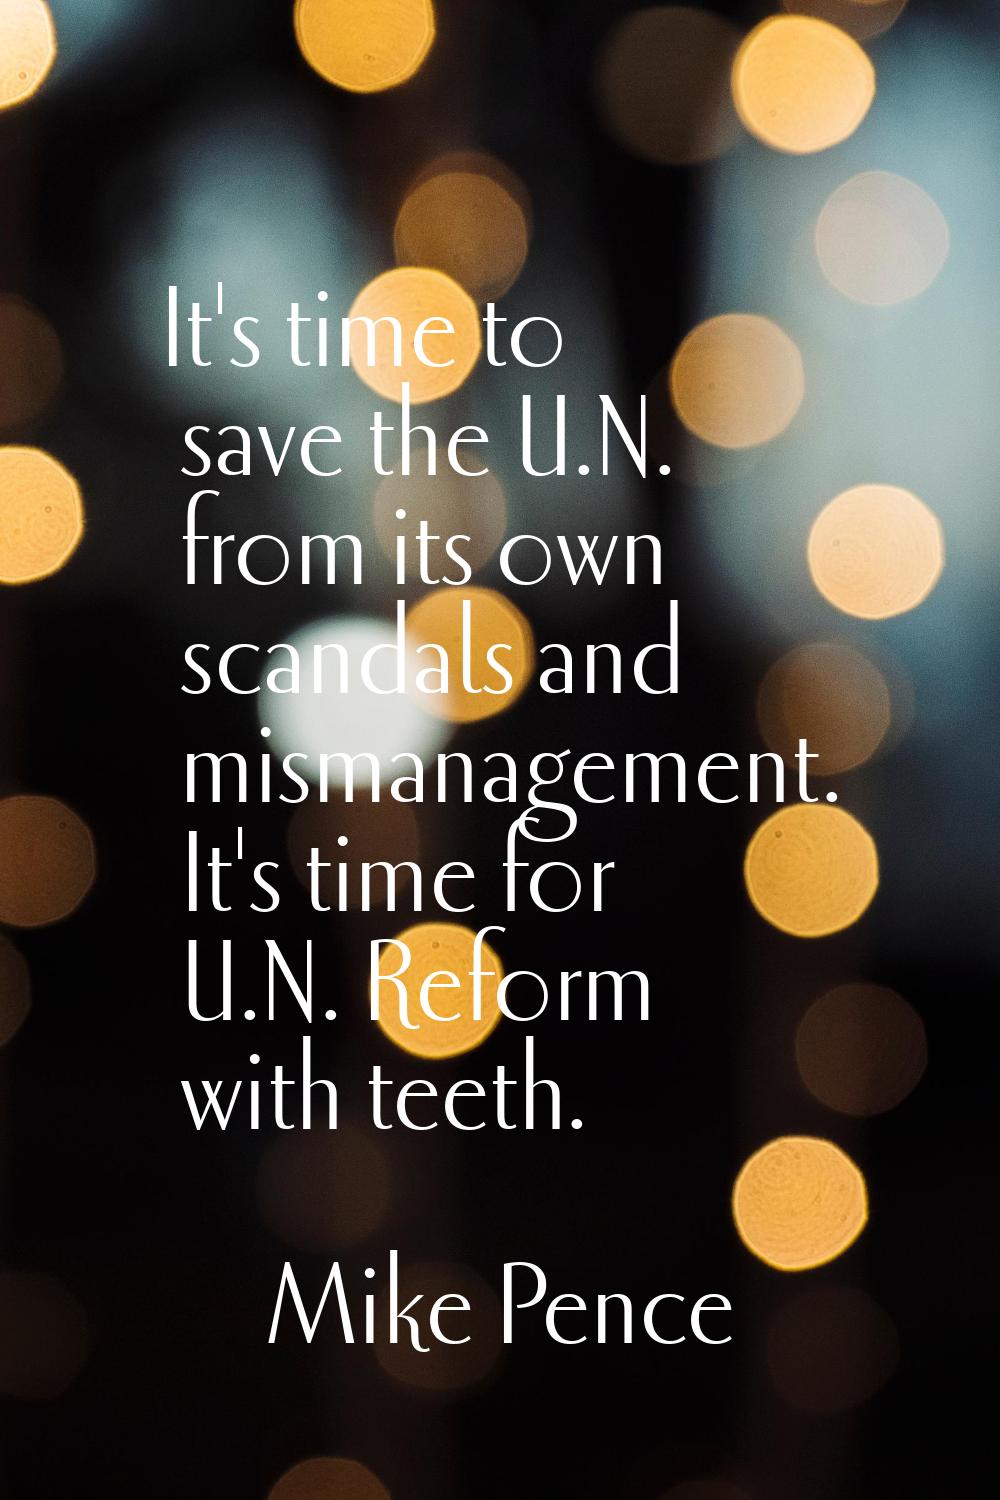 It's time to save the U.N. from its own scandals and mismanagement. It's time for U.N. Reform with 